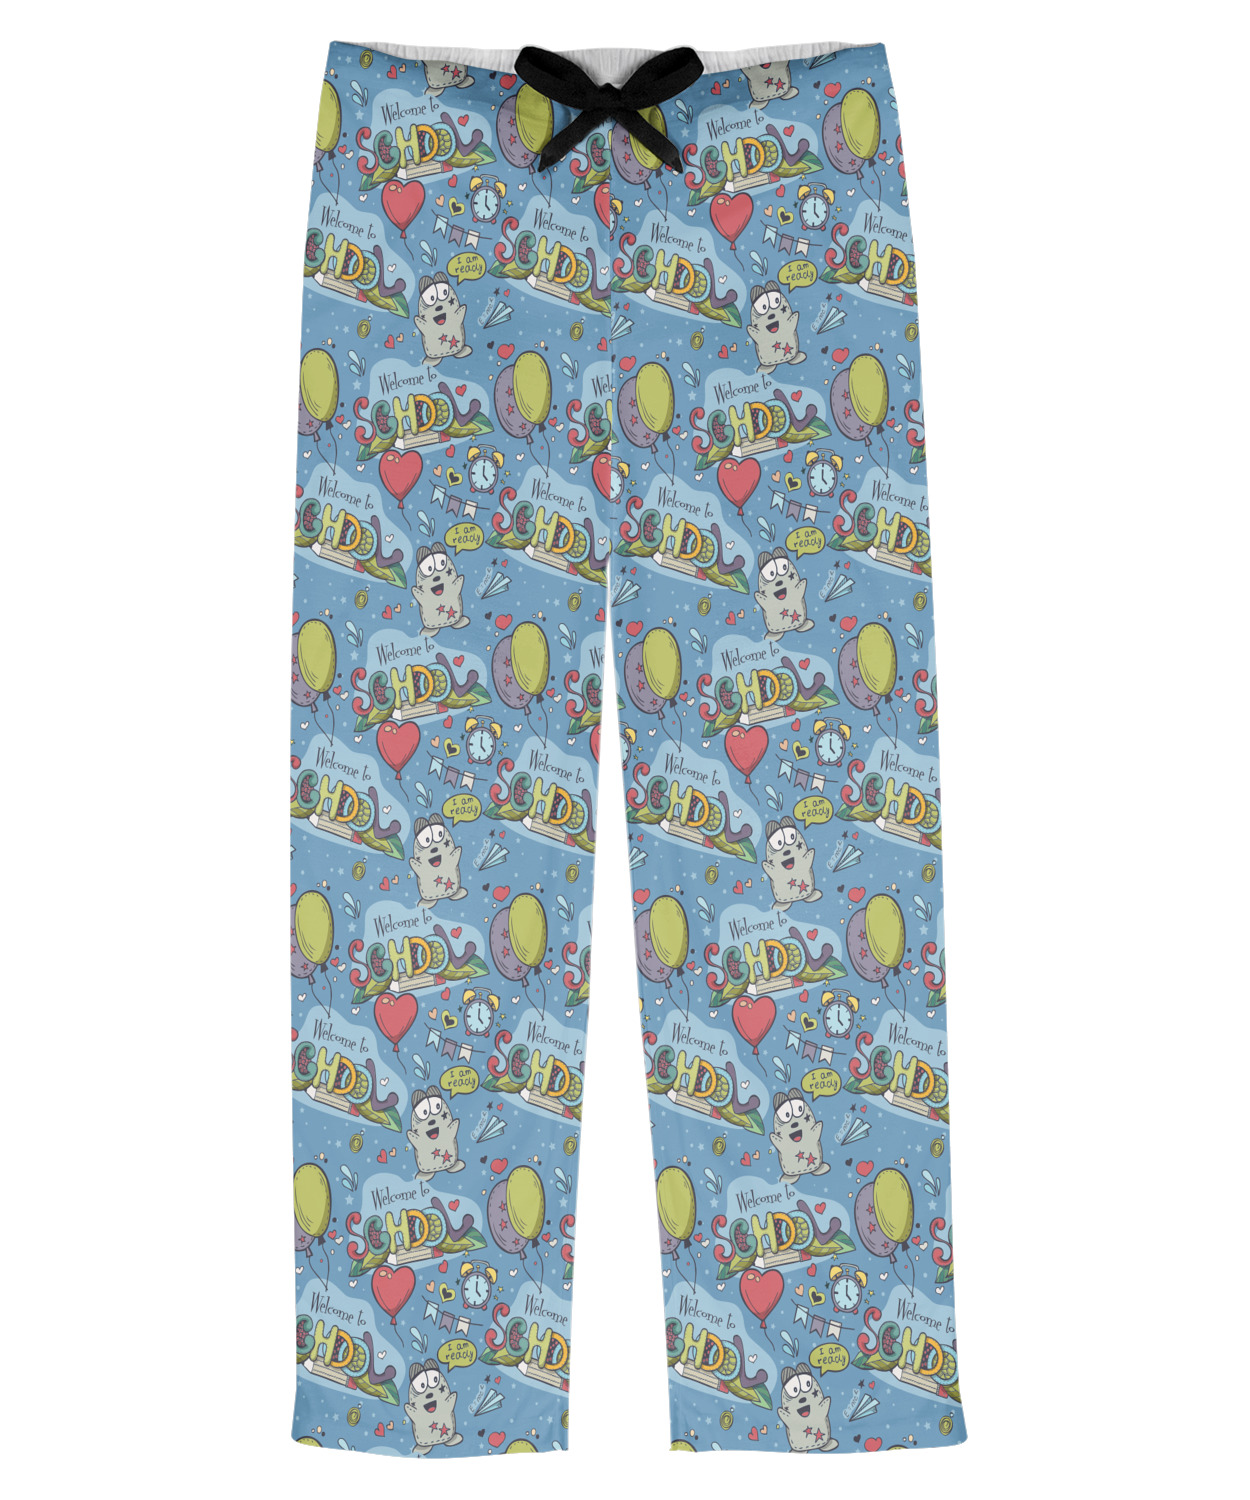 Welcome to School Mens Pajama Pants - XL (Personalized) - YouCustomizeIt